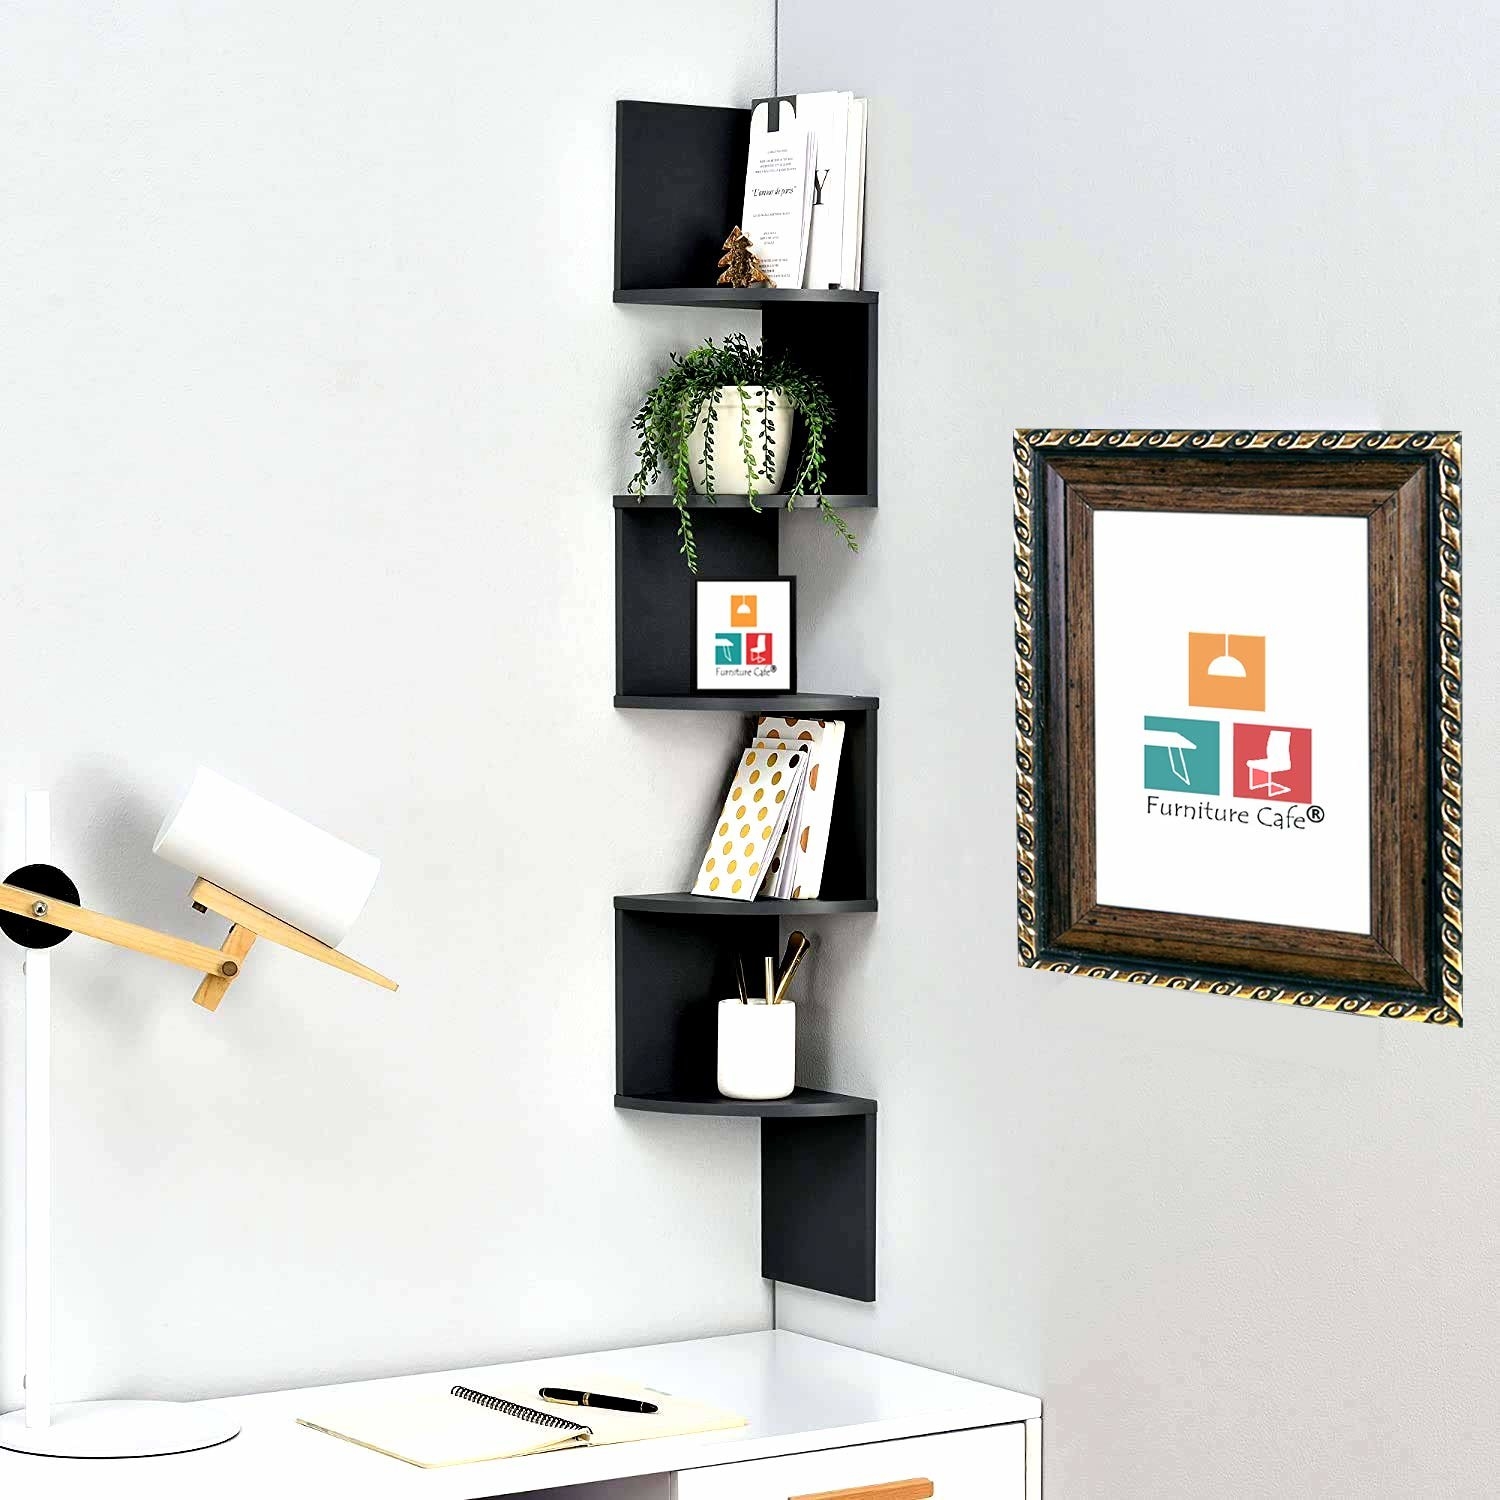 The corner zig-zag shelf with books and other stationery mounted above a desk with a lamp and notebook kept open